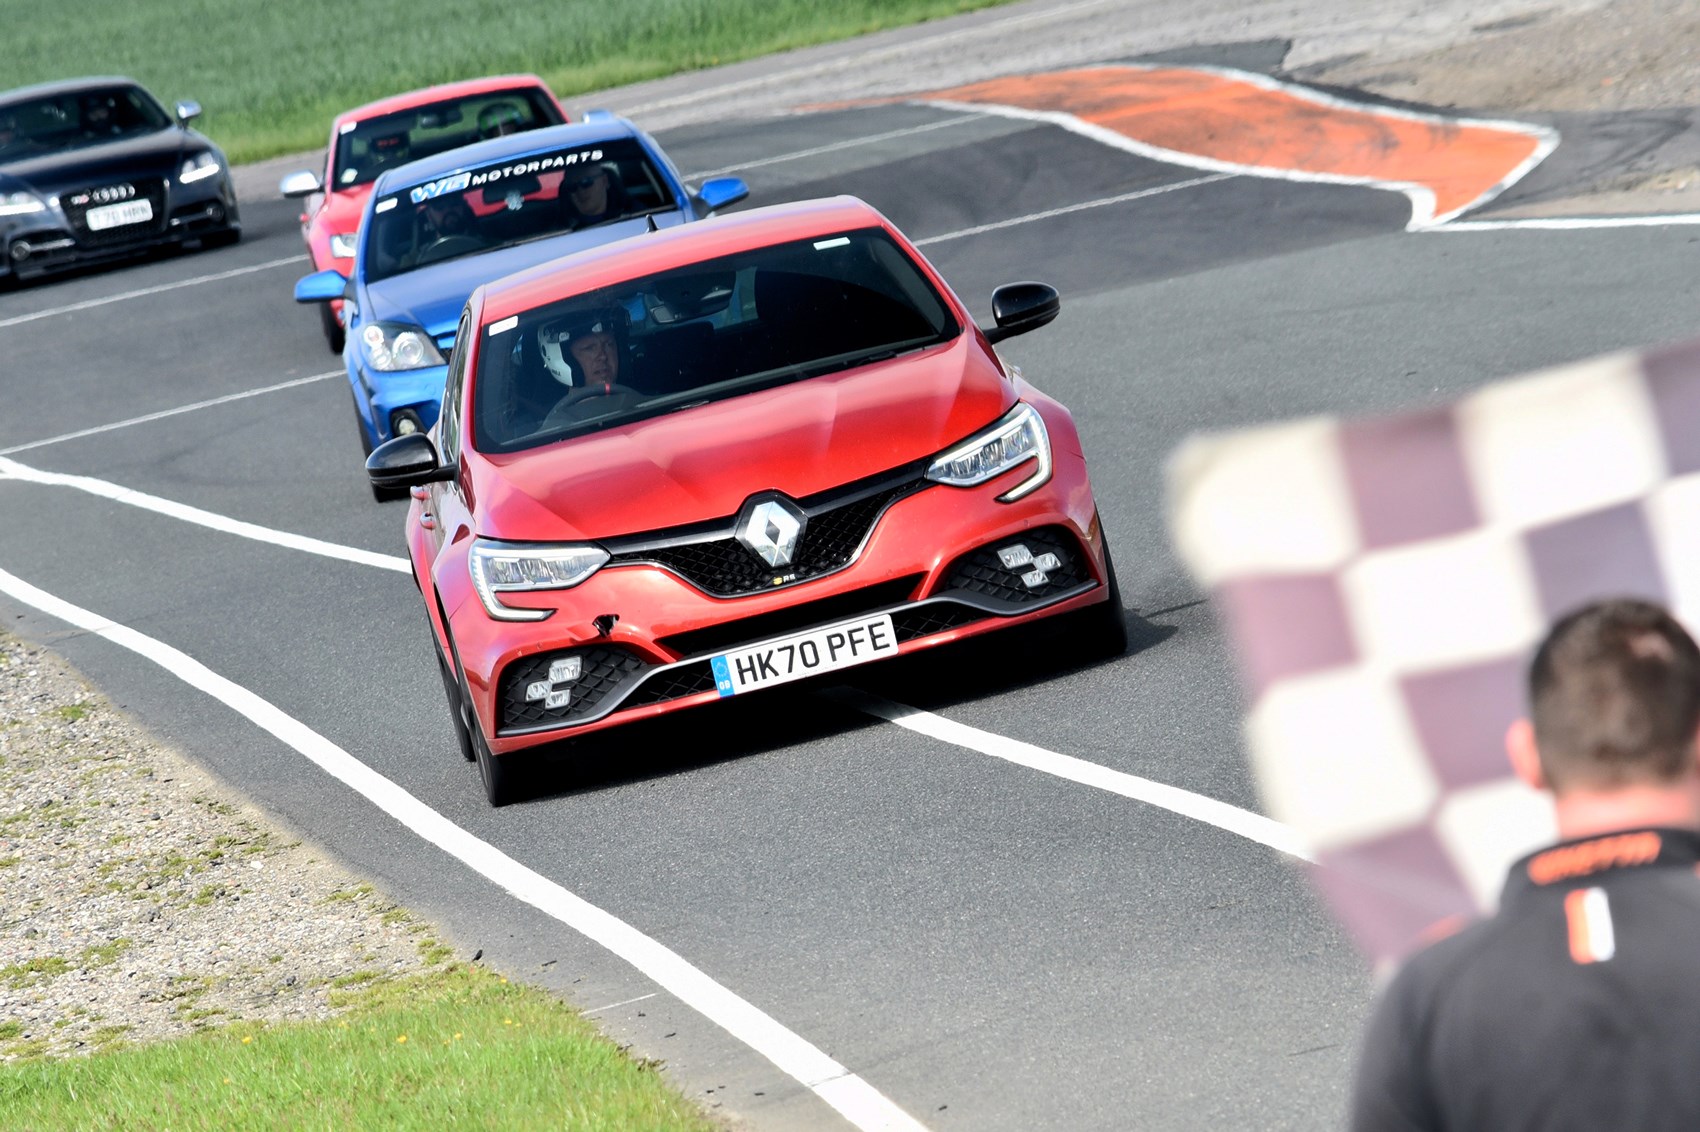 Dream On: Renault Megane II First Drive